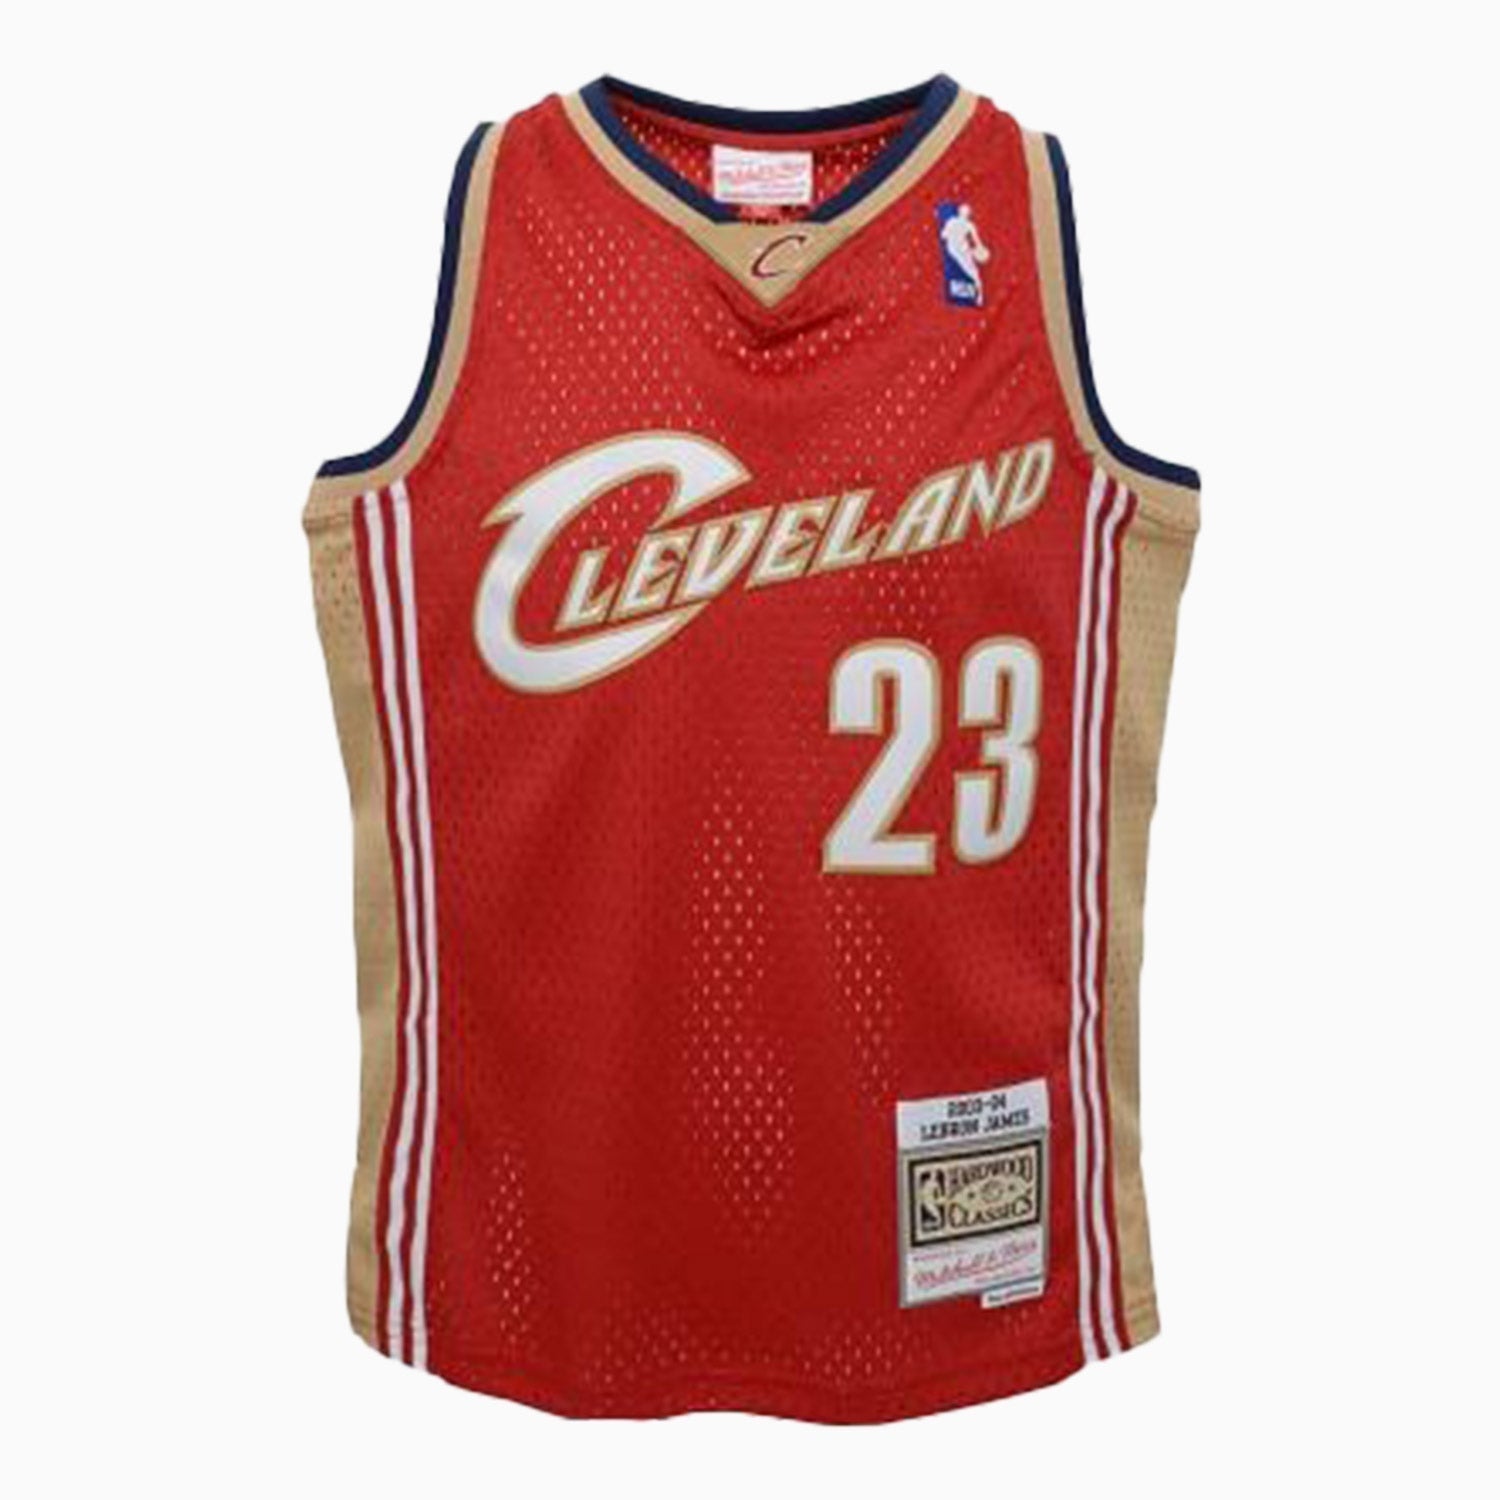  Mitchell & Ness NBA Cleveland Cavaliers Lebron James 2003  Swingman Road Jersey S : Clothing, Shoes & Jewelry